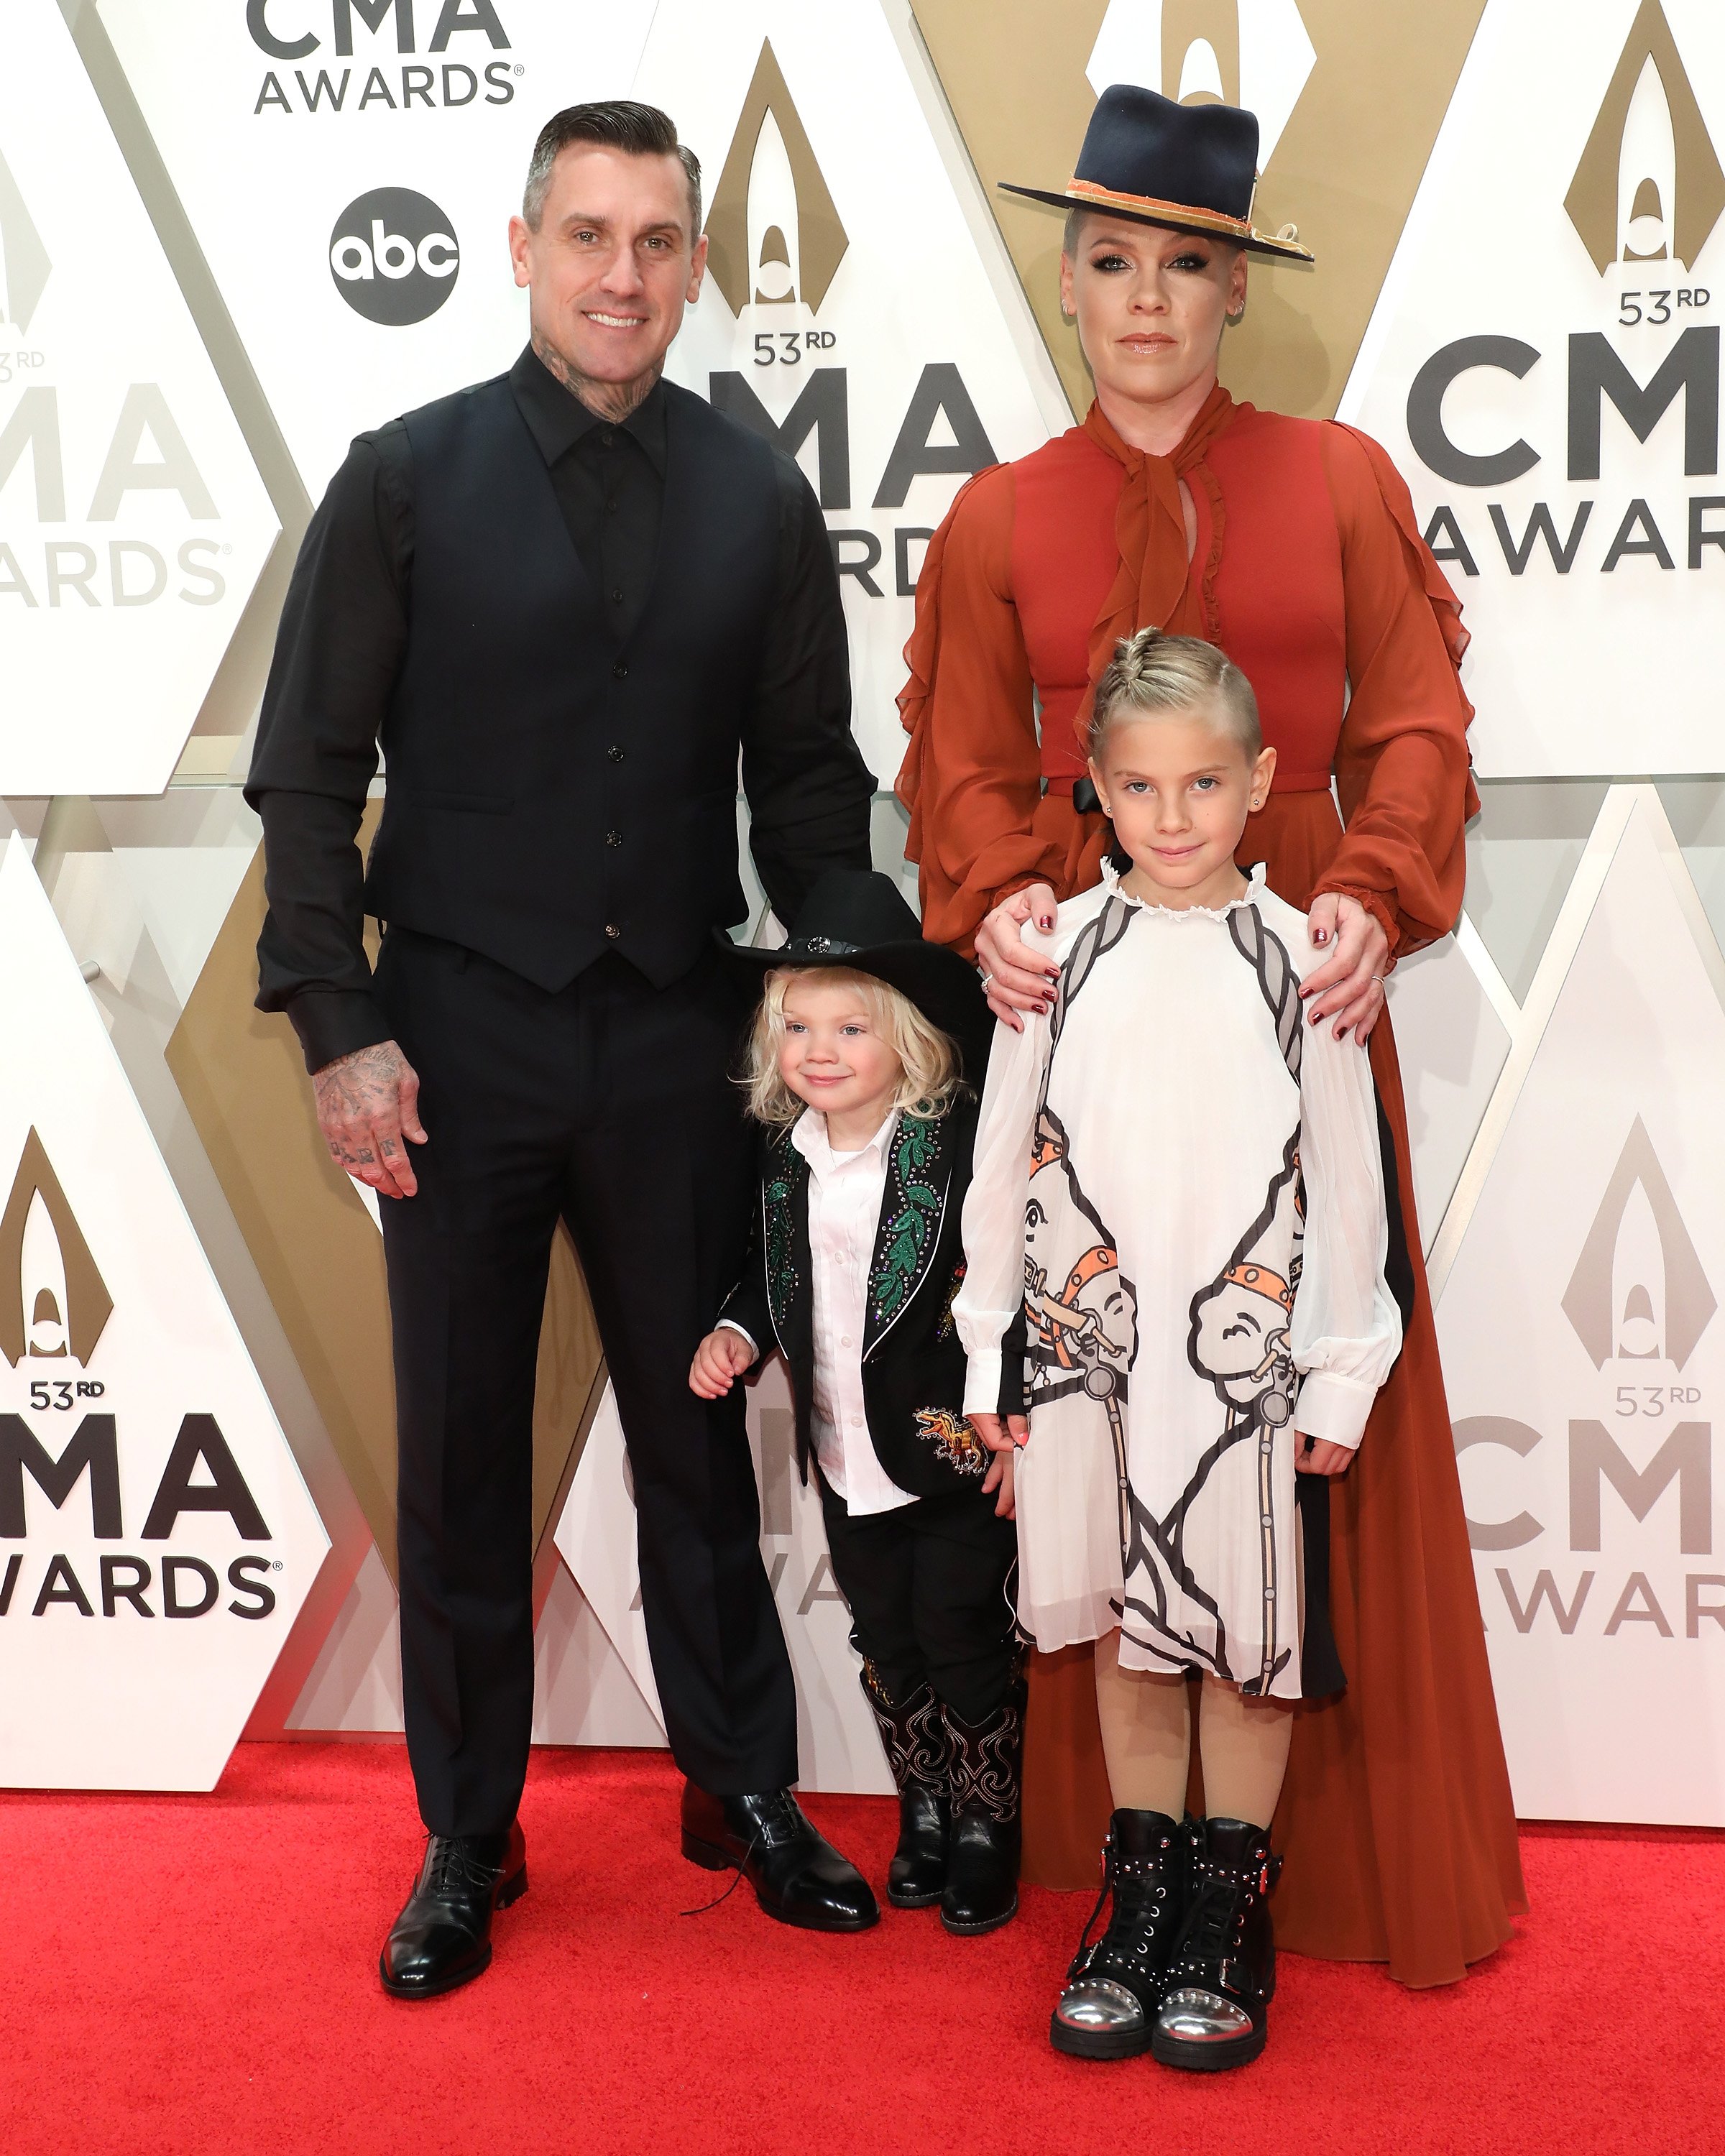 Carey Hart, Pink, Jameson, and Willow attend the 53nd annual CMA Awards on November 13, 2019 in Nashville, Tennessee. | Source: Getty Images